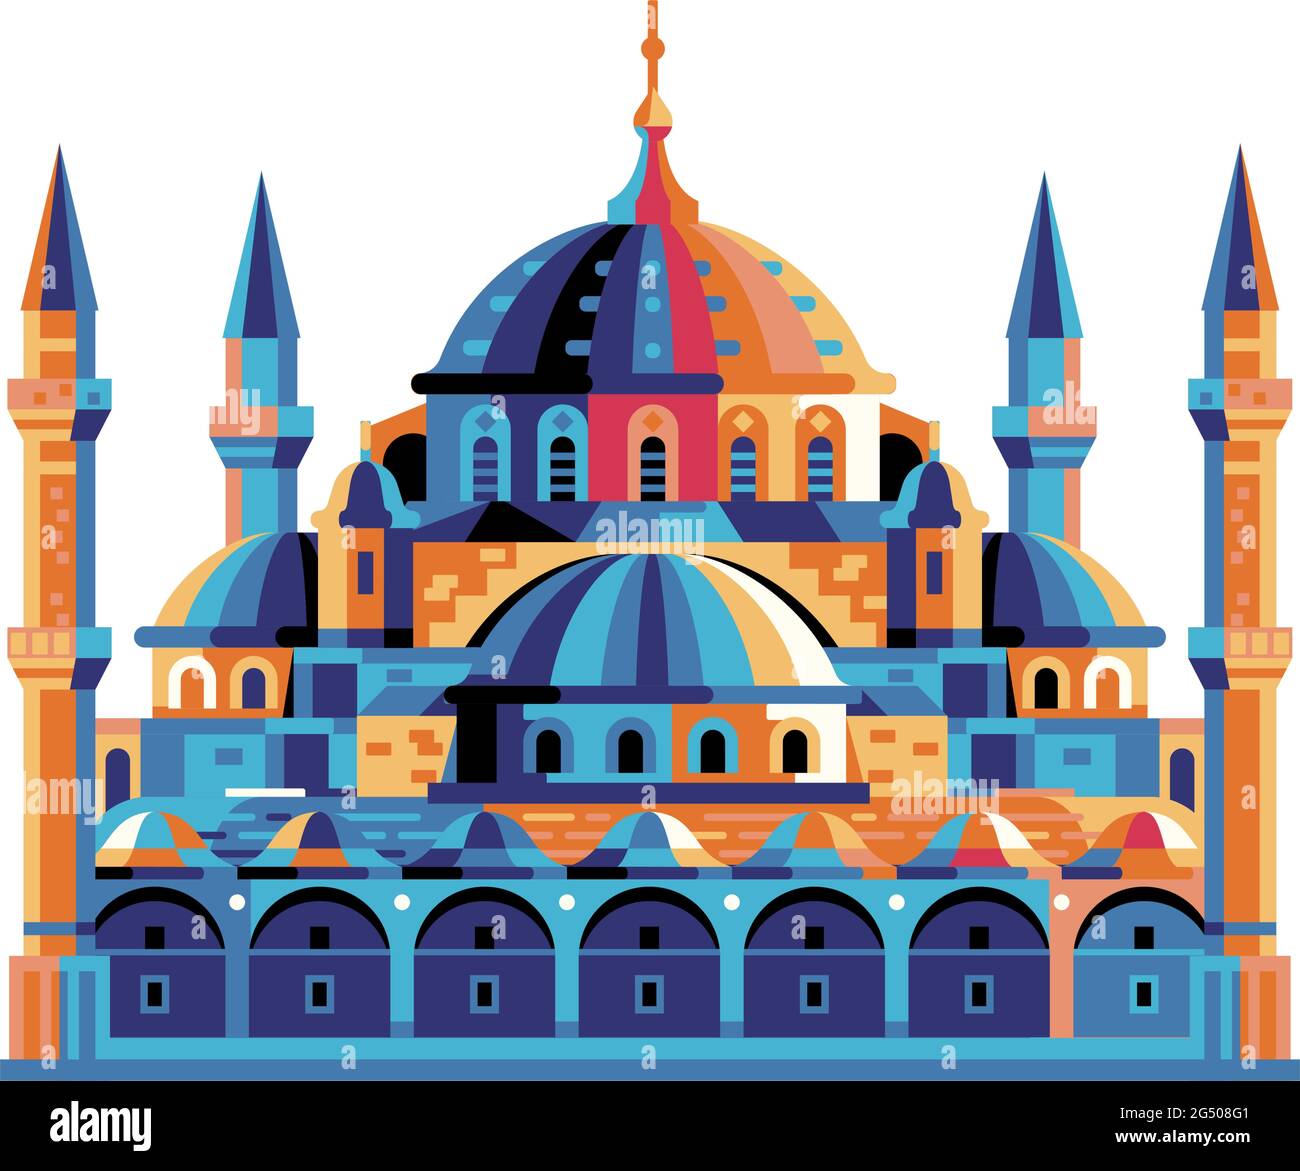 Istanbul Sultanahmet Blue Mosque Building in Flat Stock Vector